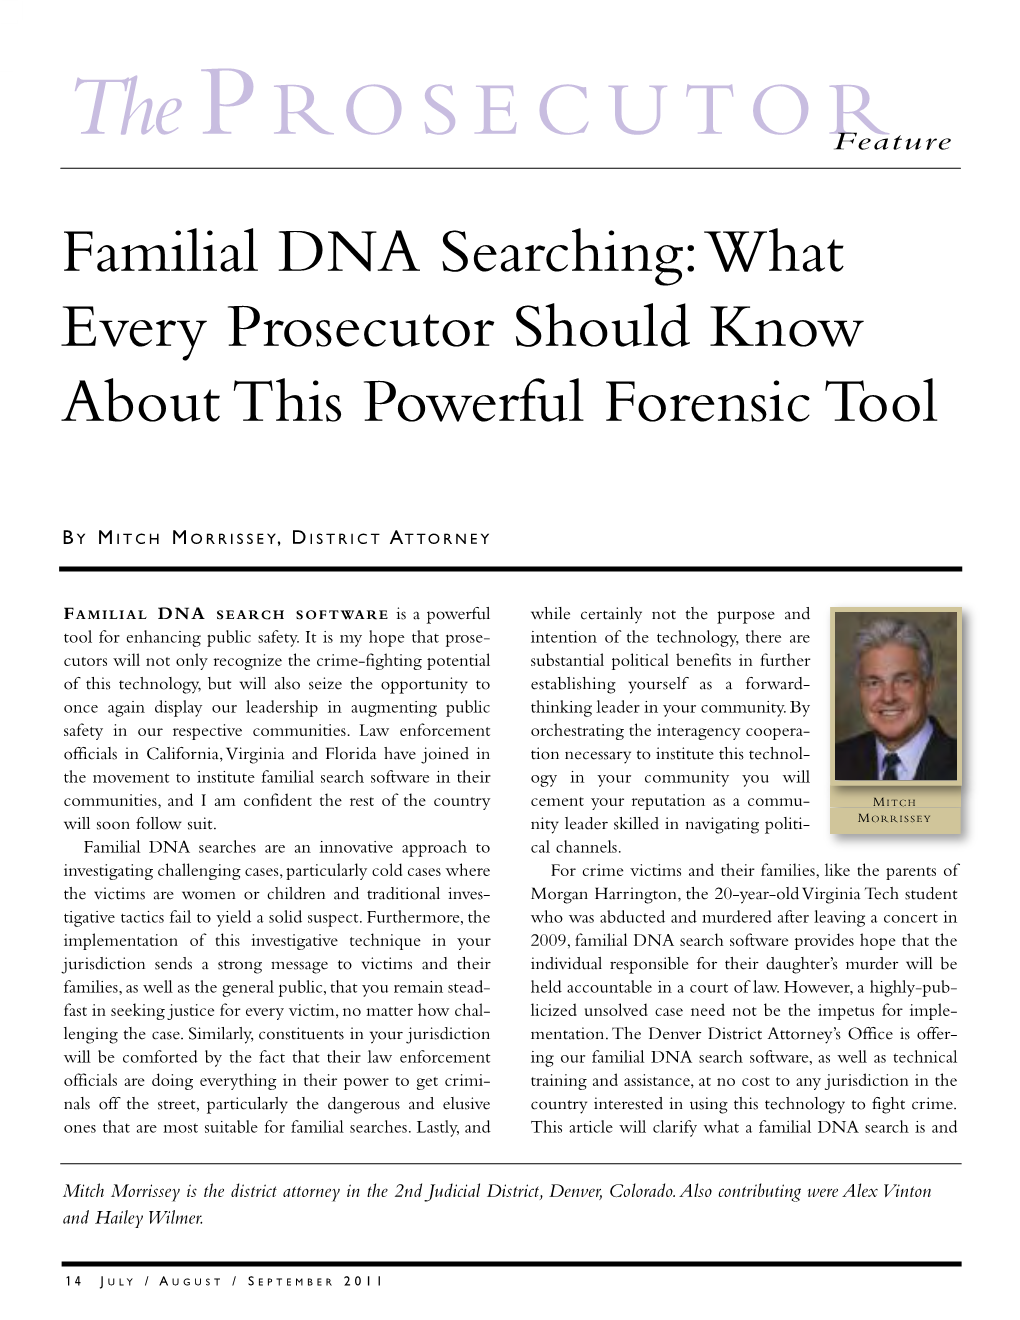 Familial DNA Searching: What Every Prosecutor Should Know About This Powerful Forensic Tool